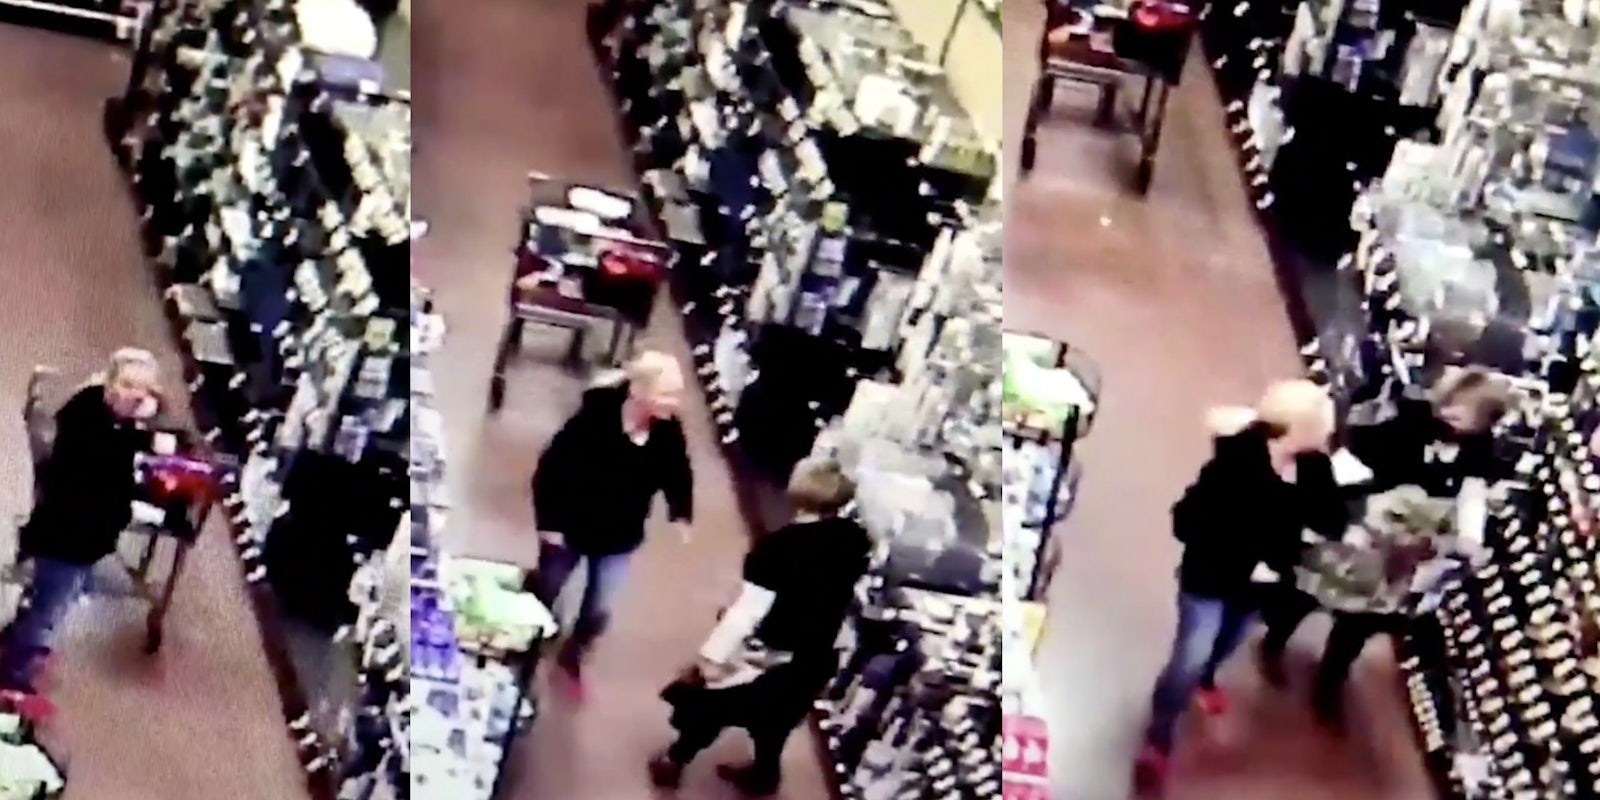 Colorado woman slaps grocery store worker over mask dispute